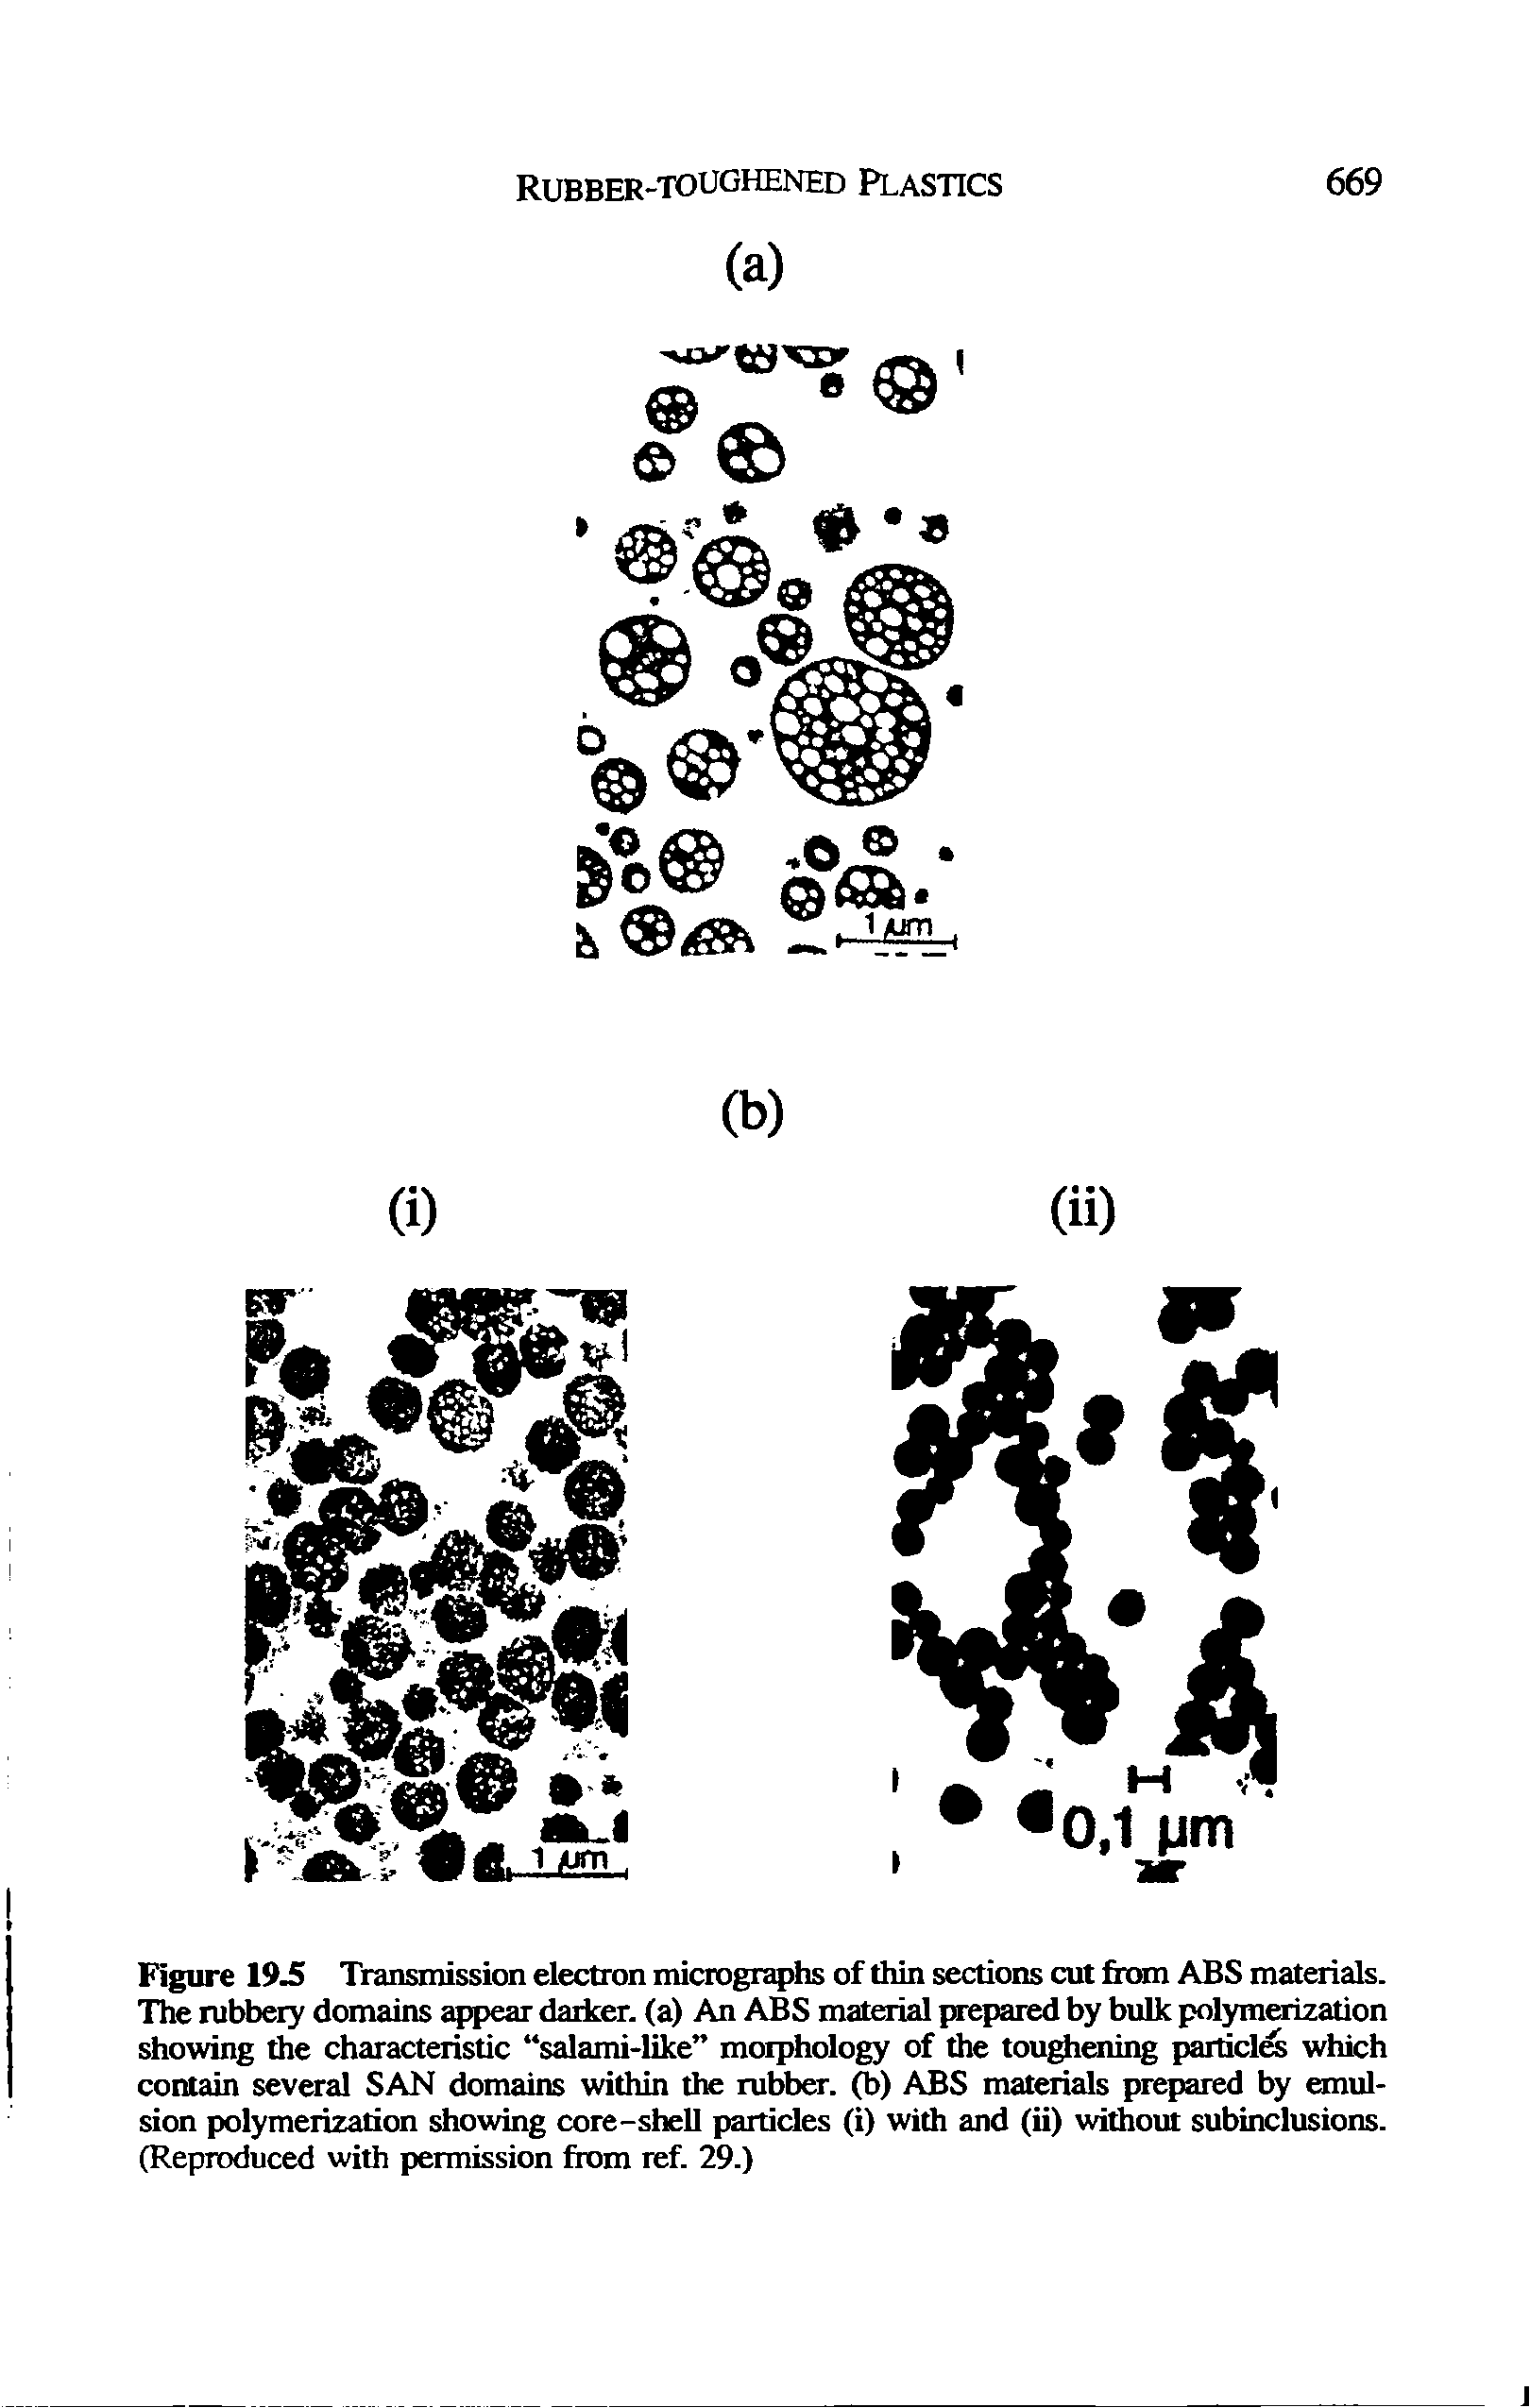 Figure 19 Transmission electron micrographs of thin sections cut from ABS materials. The rubbery domains appear darker, (a) An ABS material prepared by bulk polymerization showing the characteristic salami-like morphology of the toughening particl which contain several SAN domains within the rubber, (b) ABS materials prepared by emulsion polymerization showing cote-shell partides (i) widi and (ii) widiout subinclusions. (Reproduced with permission from ref. 29.)...